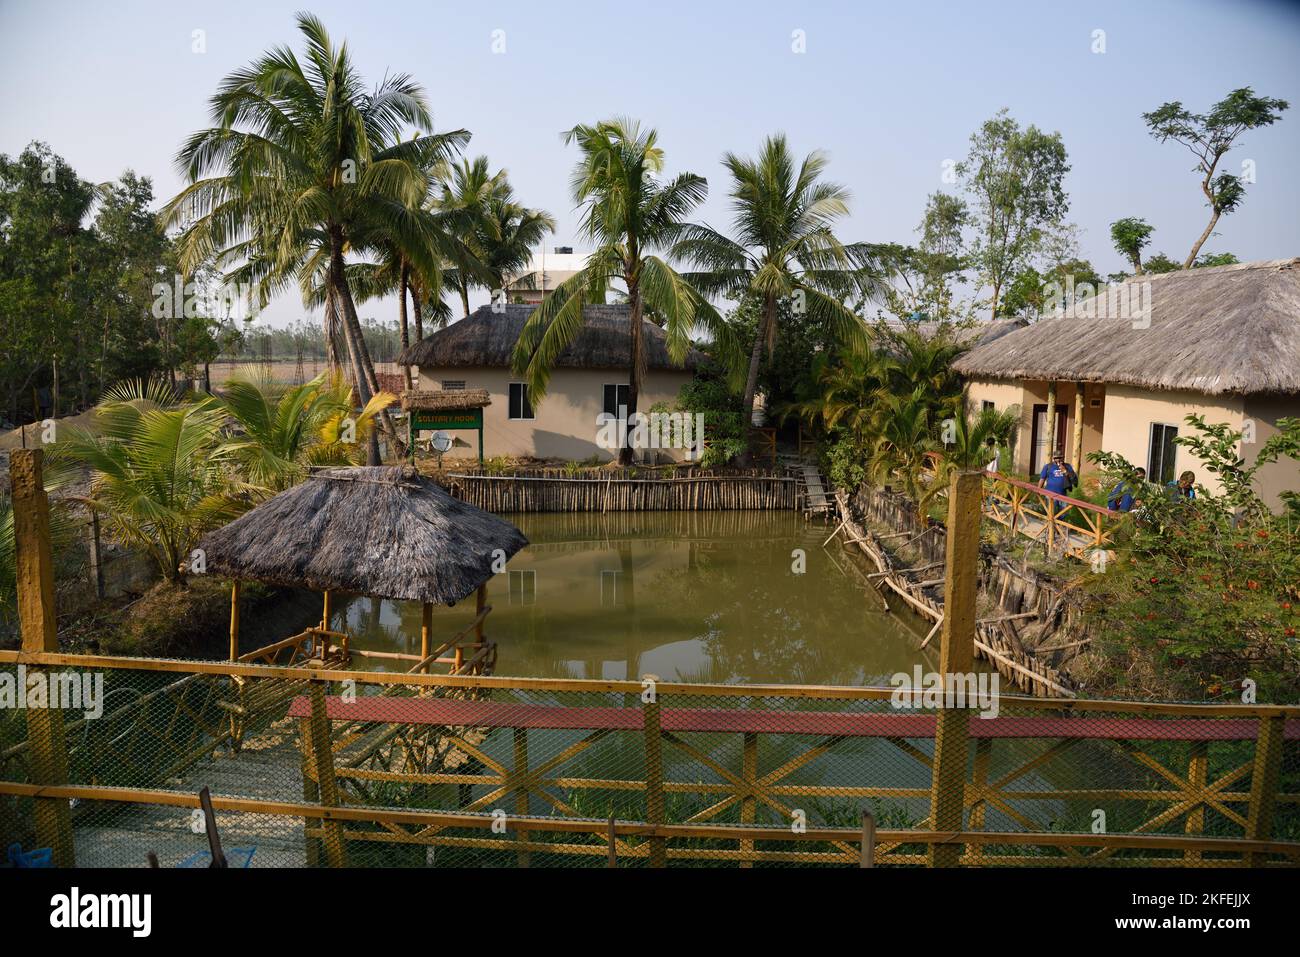 NOOK Solitary Resort, Pakhiralay, Gosaba, Sunderban, 24 Pargana Sud, Bengale-Occidental, Inde Banque D'Images